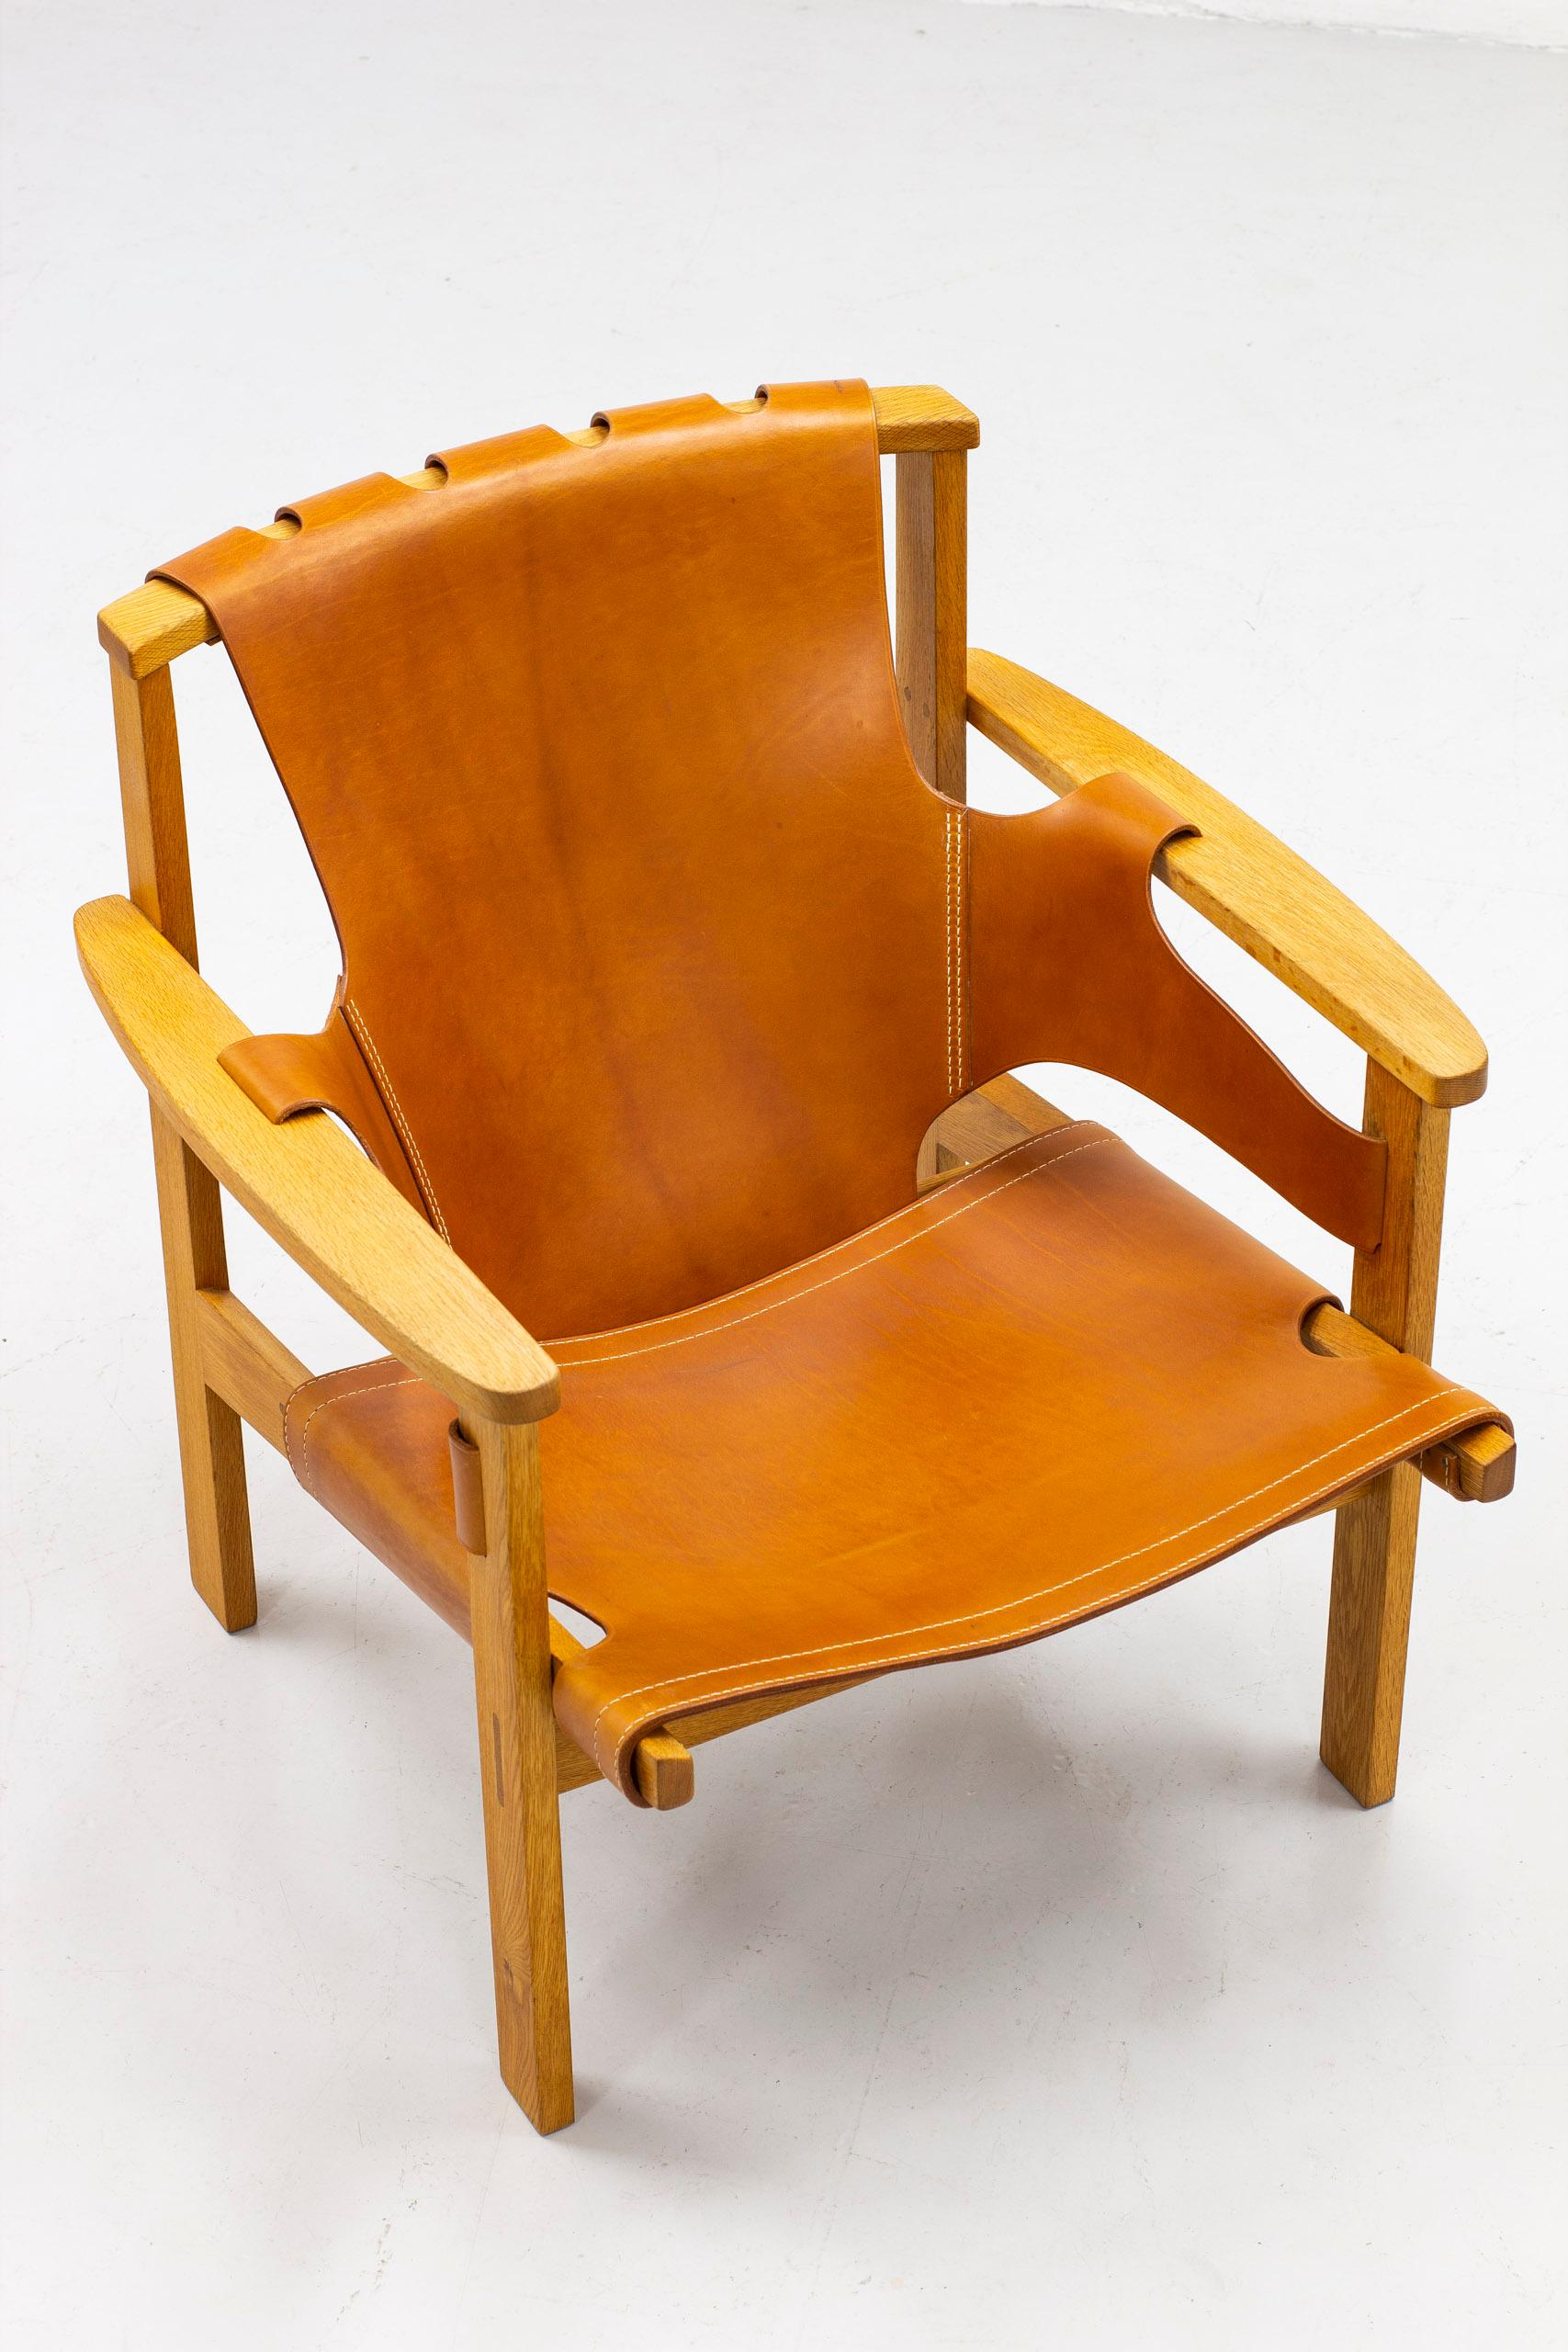 Lounge Chairs in Oak and Leather by Carl-Axel Acking, Nk, Nordiska Kompaniet 12